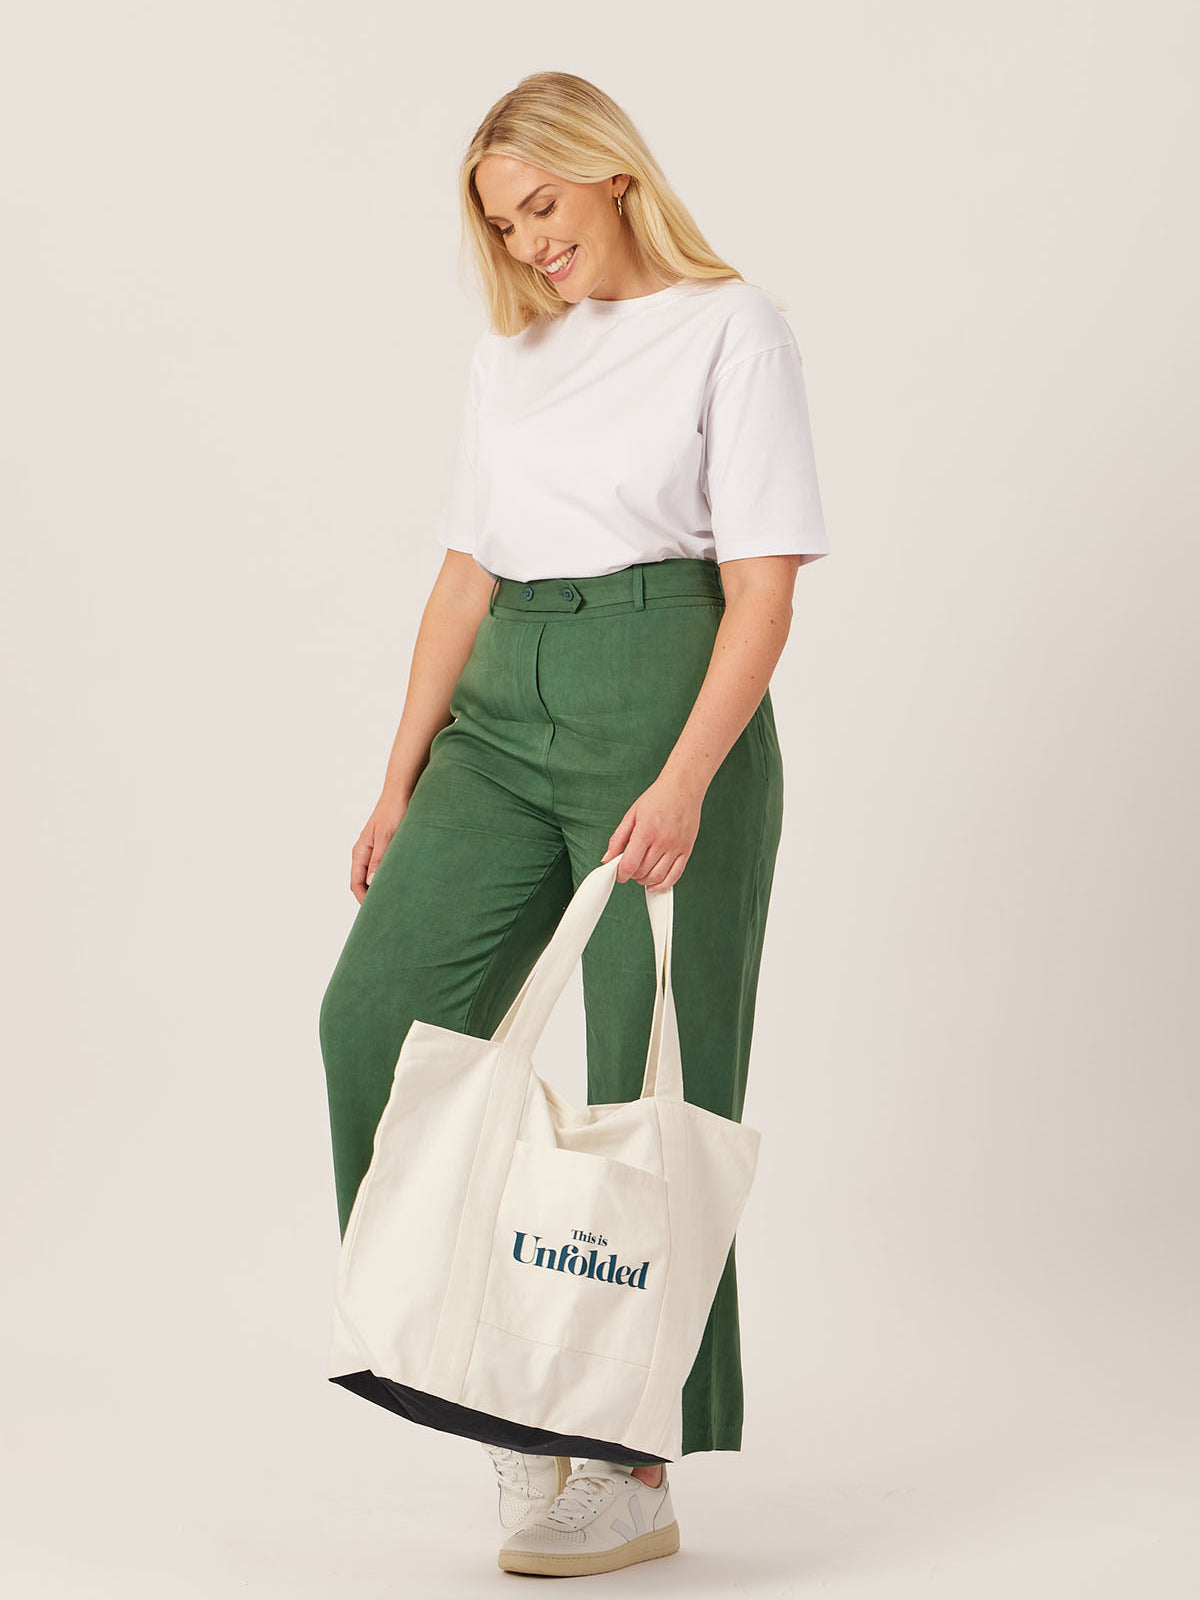 A model carries the Joey bag in their hand whilst wearing the white Penny t-shirt and olive Beth trousers, pictured against a white backdrop.